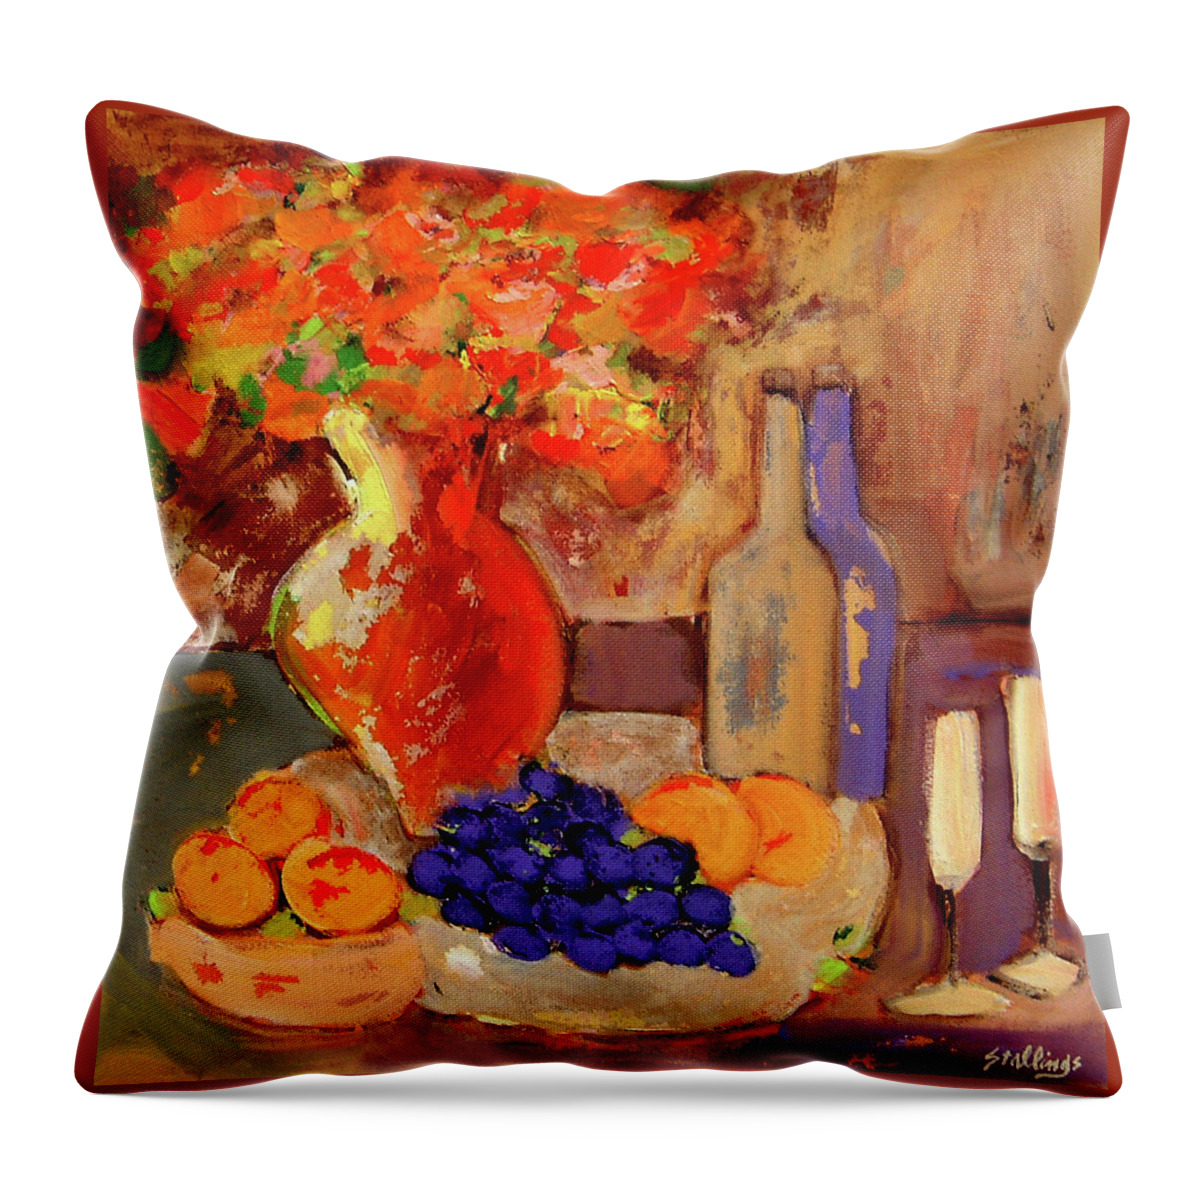 Still Life Throw Pillow featuring the painting Homecoming by Jim Stallings